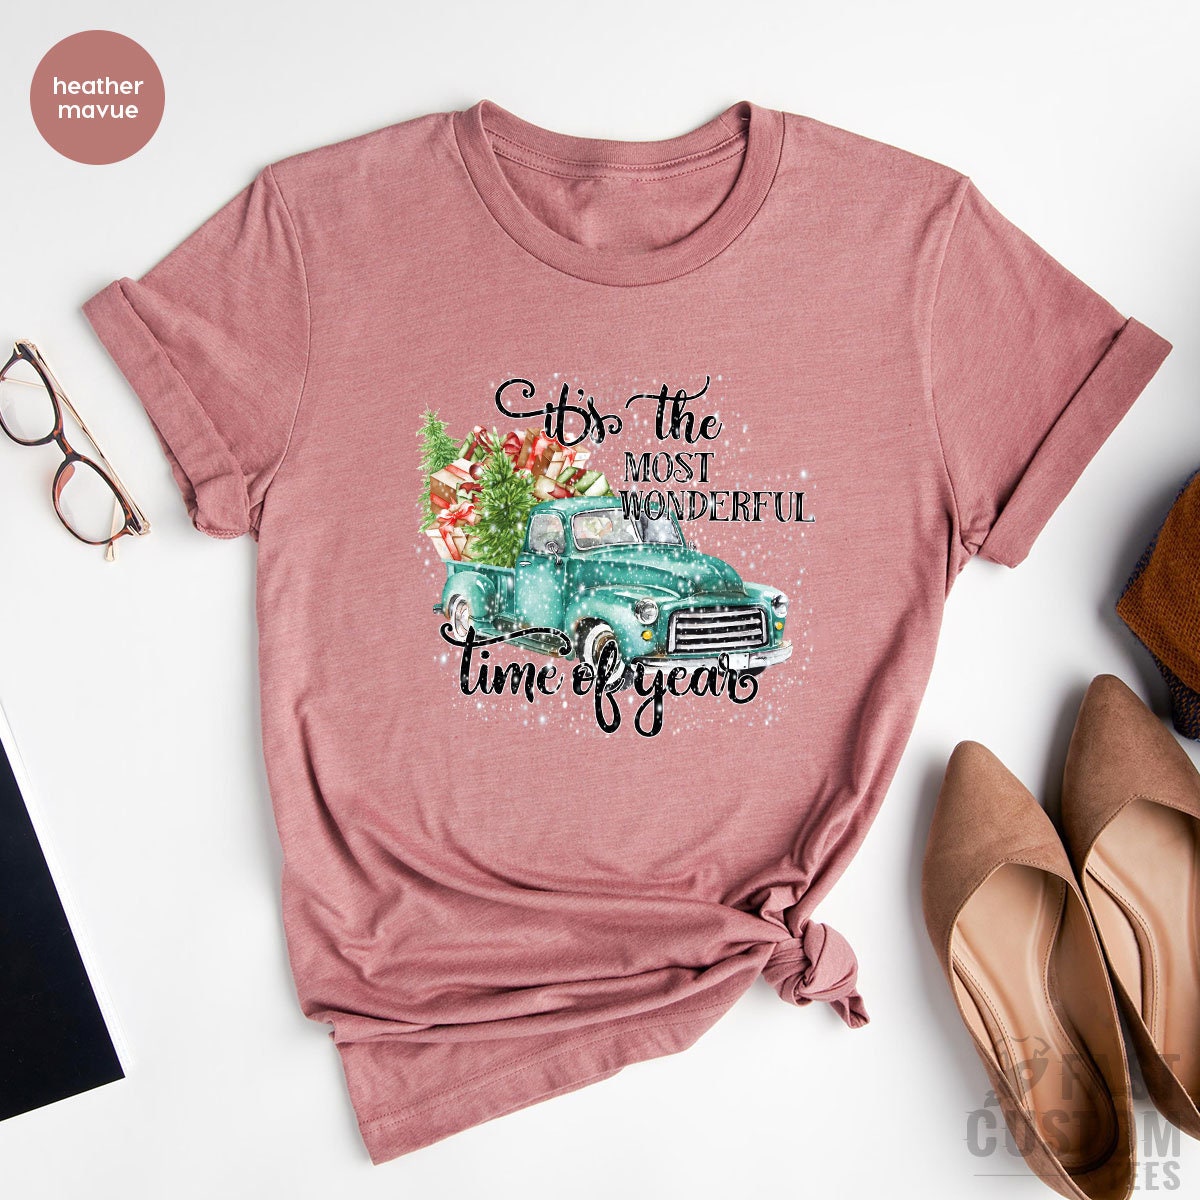 It's The Most Wonderful Time Of The Year Shirt, Christmas Tree Shirt, Christmas Truck shirt, Family Christmas Shirts, Gift For Christmas Tee - Fastdeliverytees.com